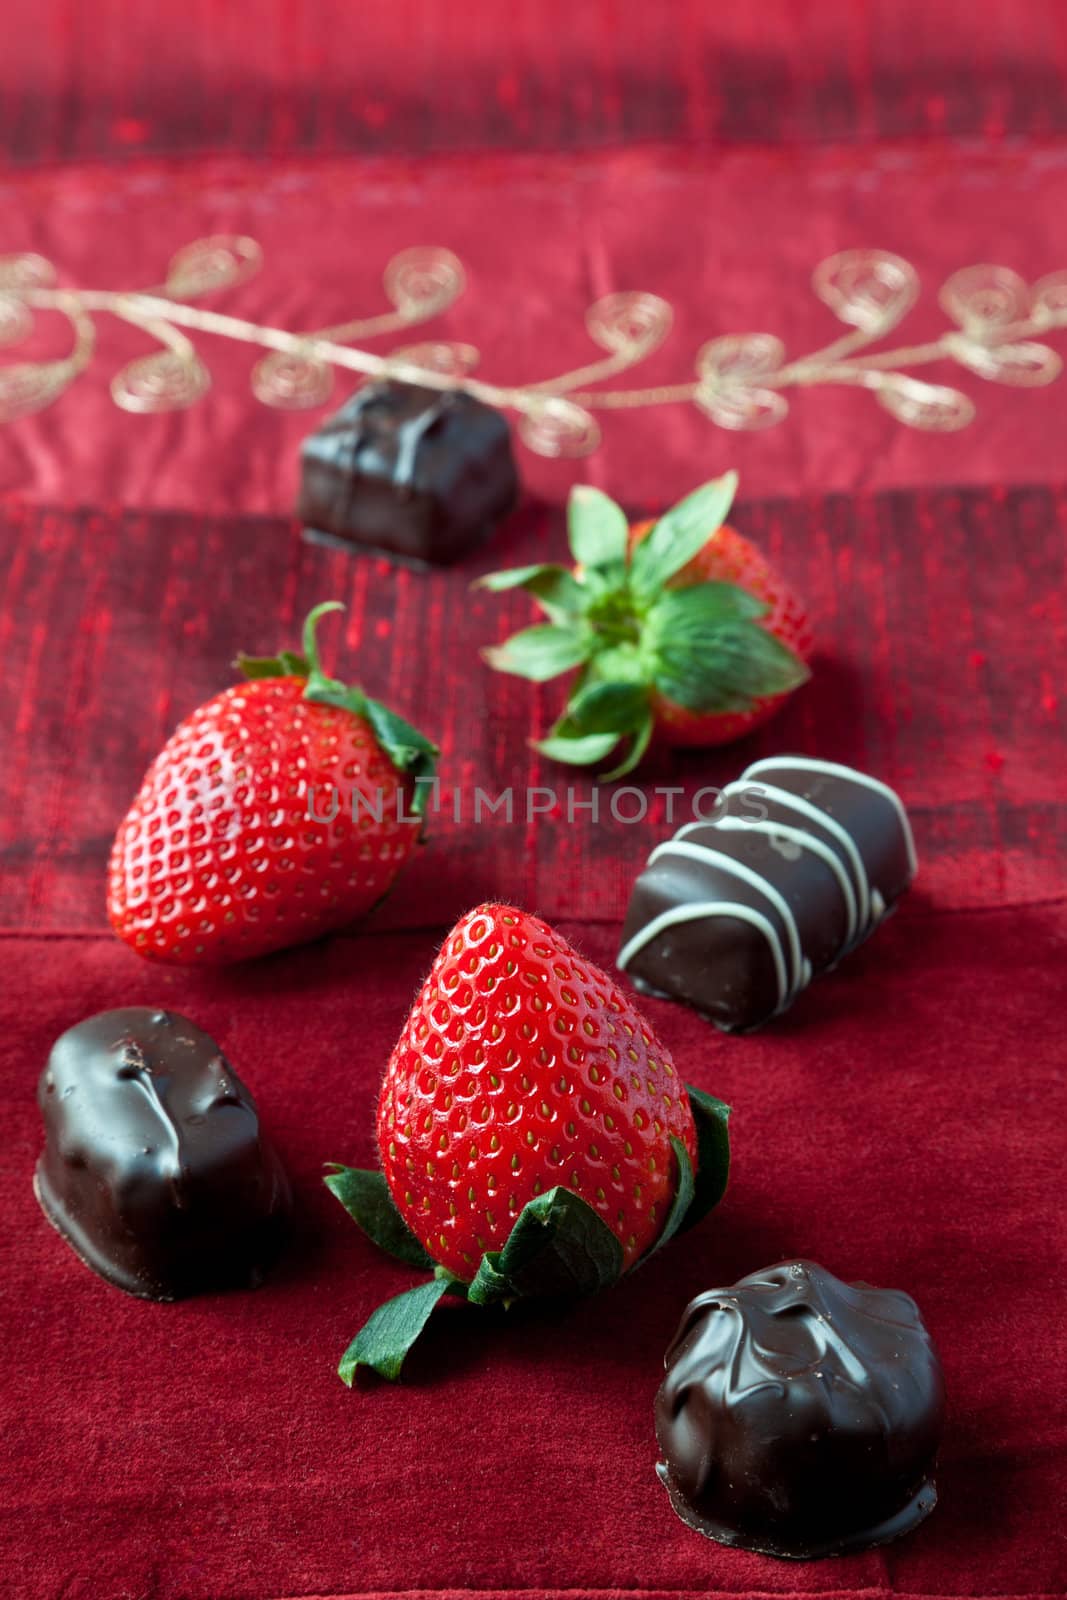 Dark chocolate bon-bons and strawberries on red textured background.